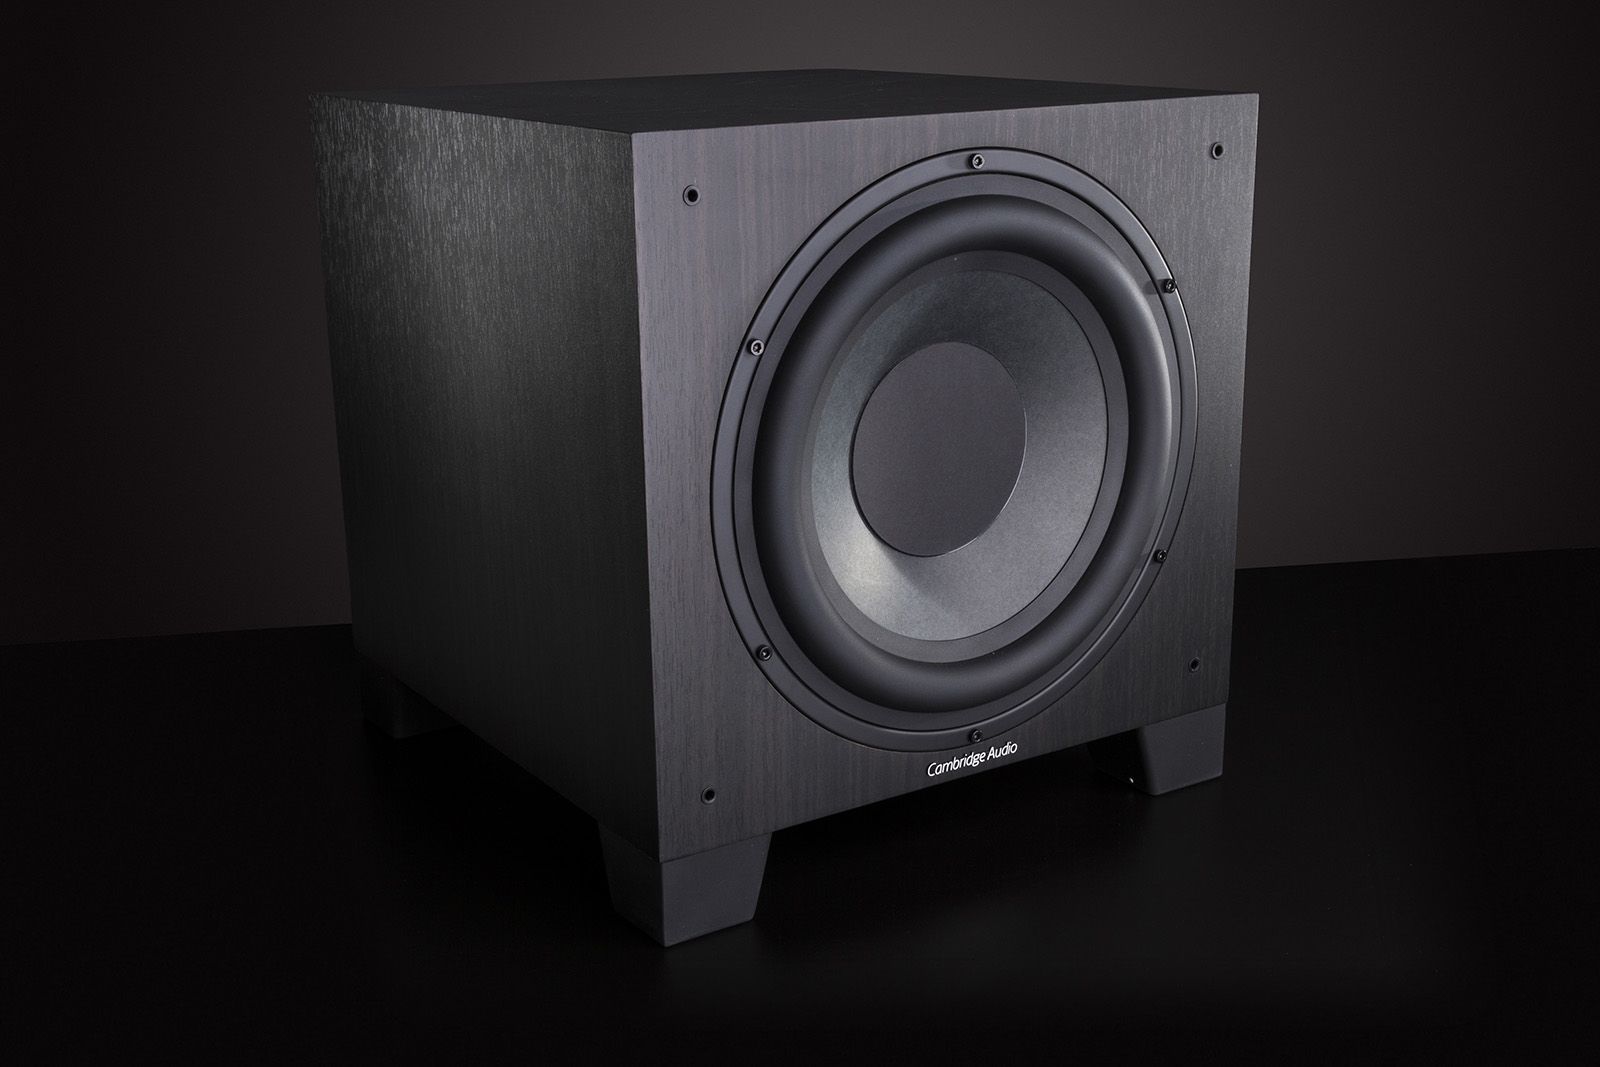 quality of sound and the tech behind it what to look for when choosing a speaker image 4